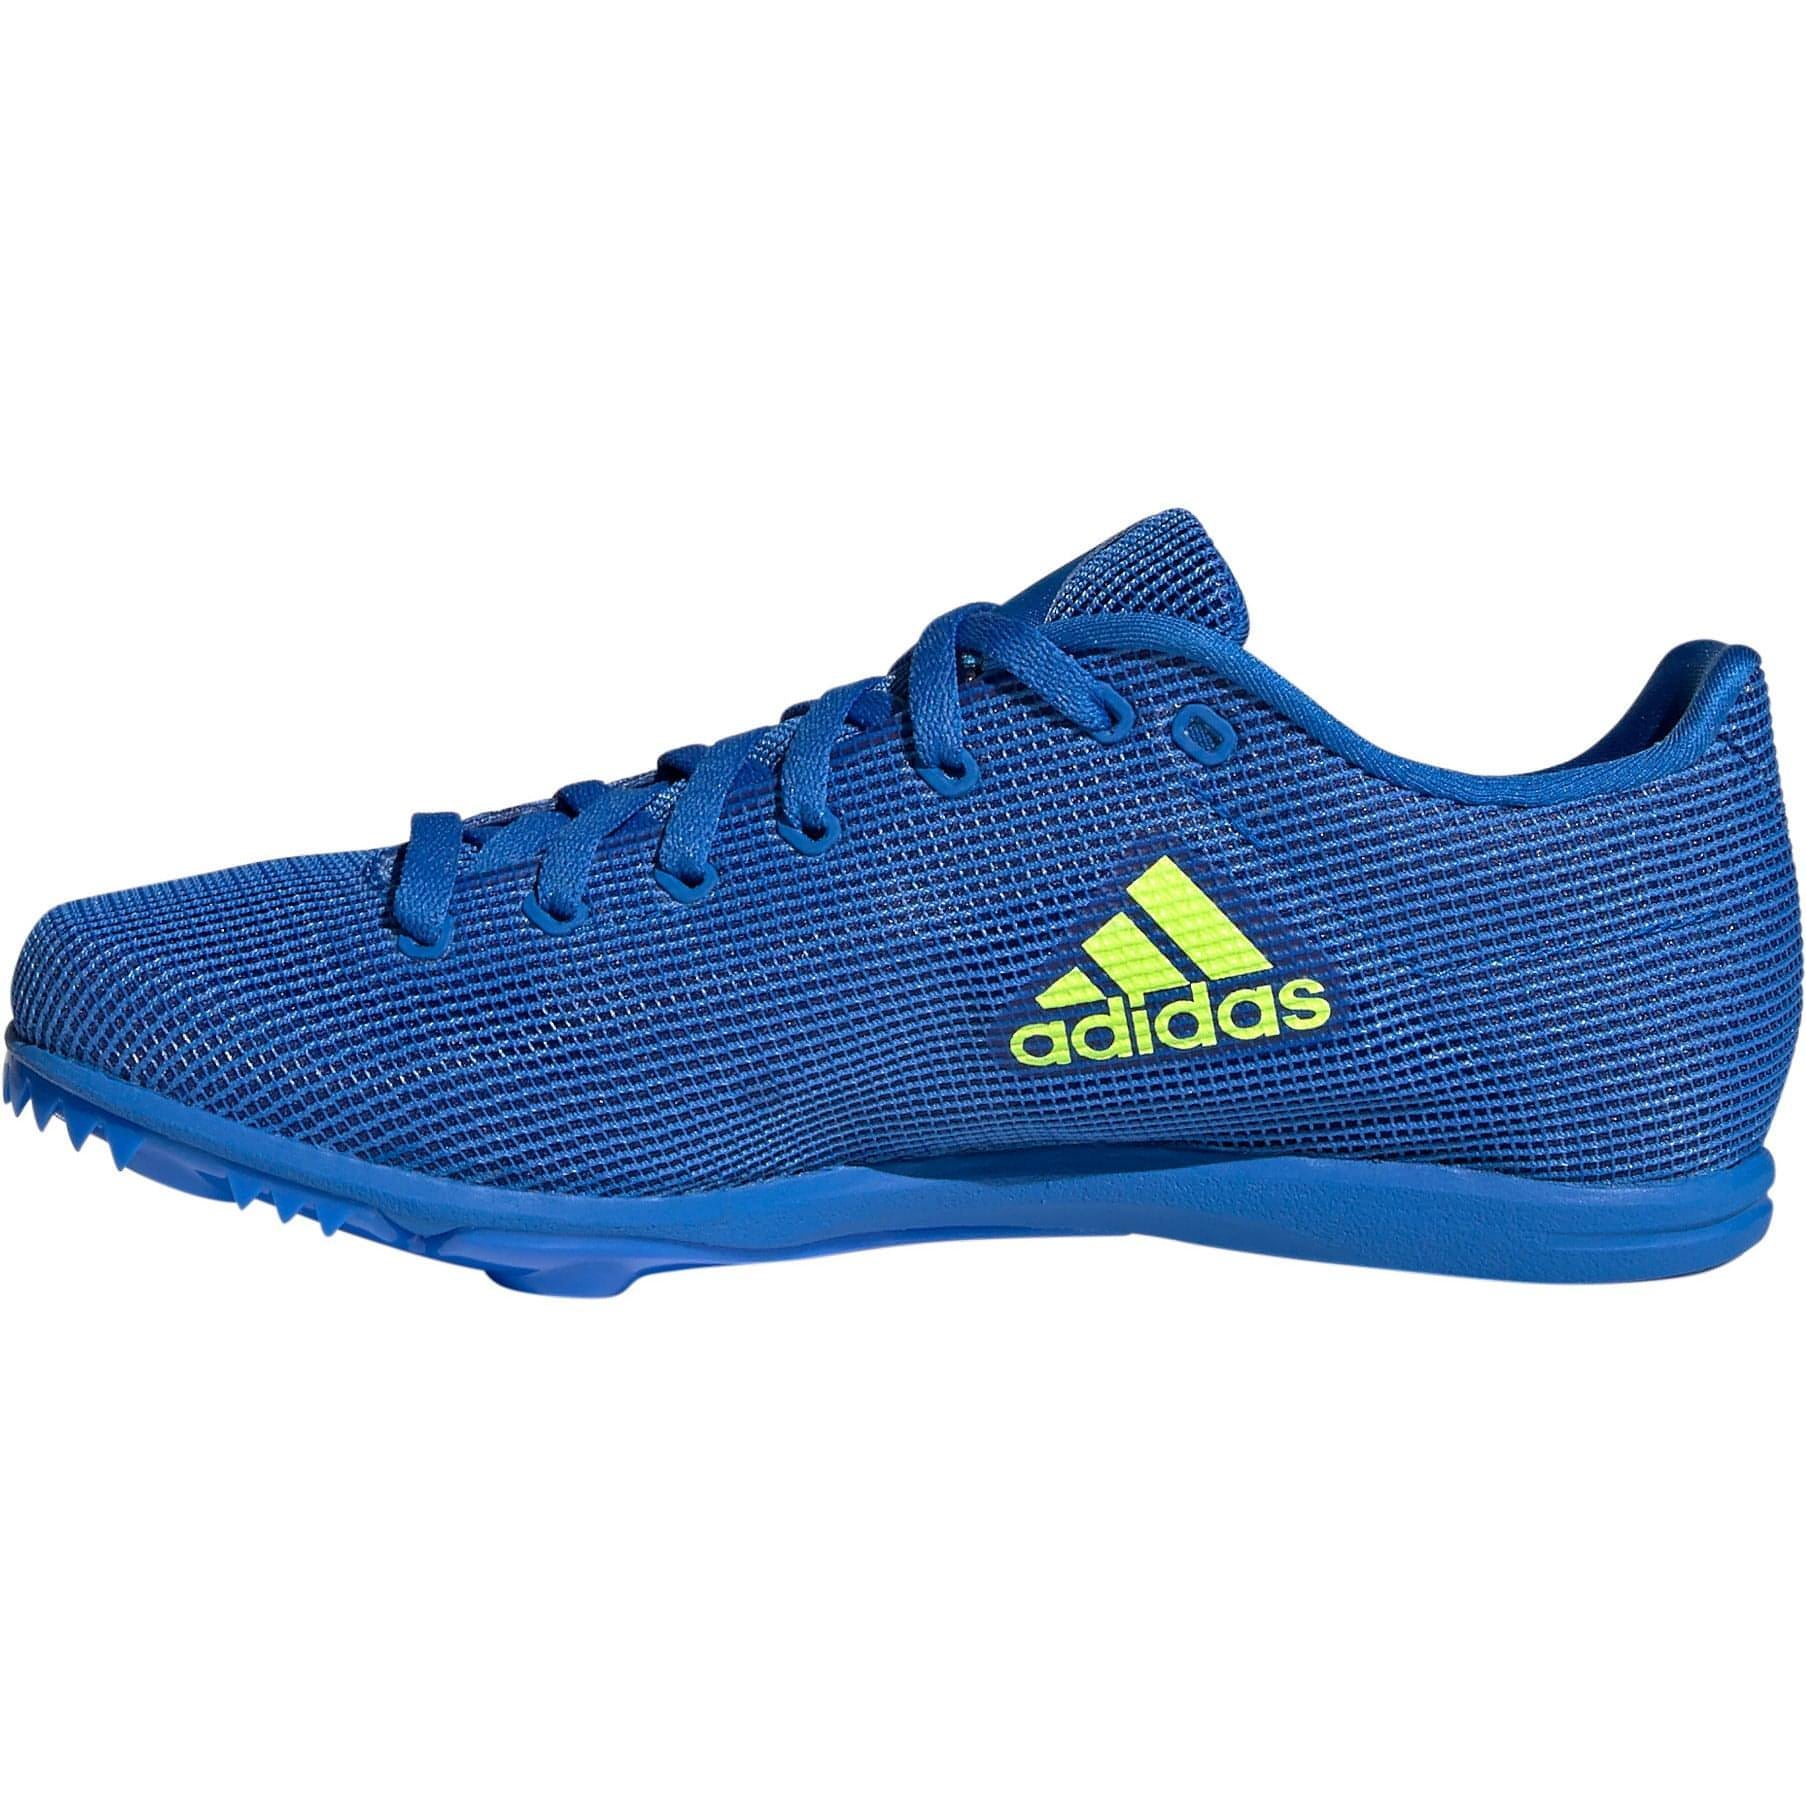 Adidas Allroundstar Fy0329 Inside - Side View